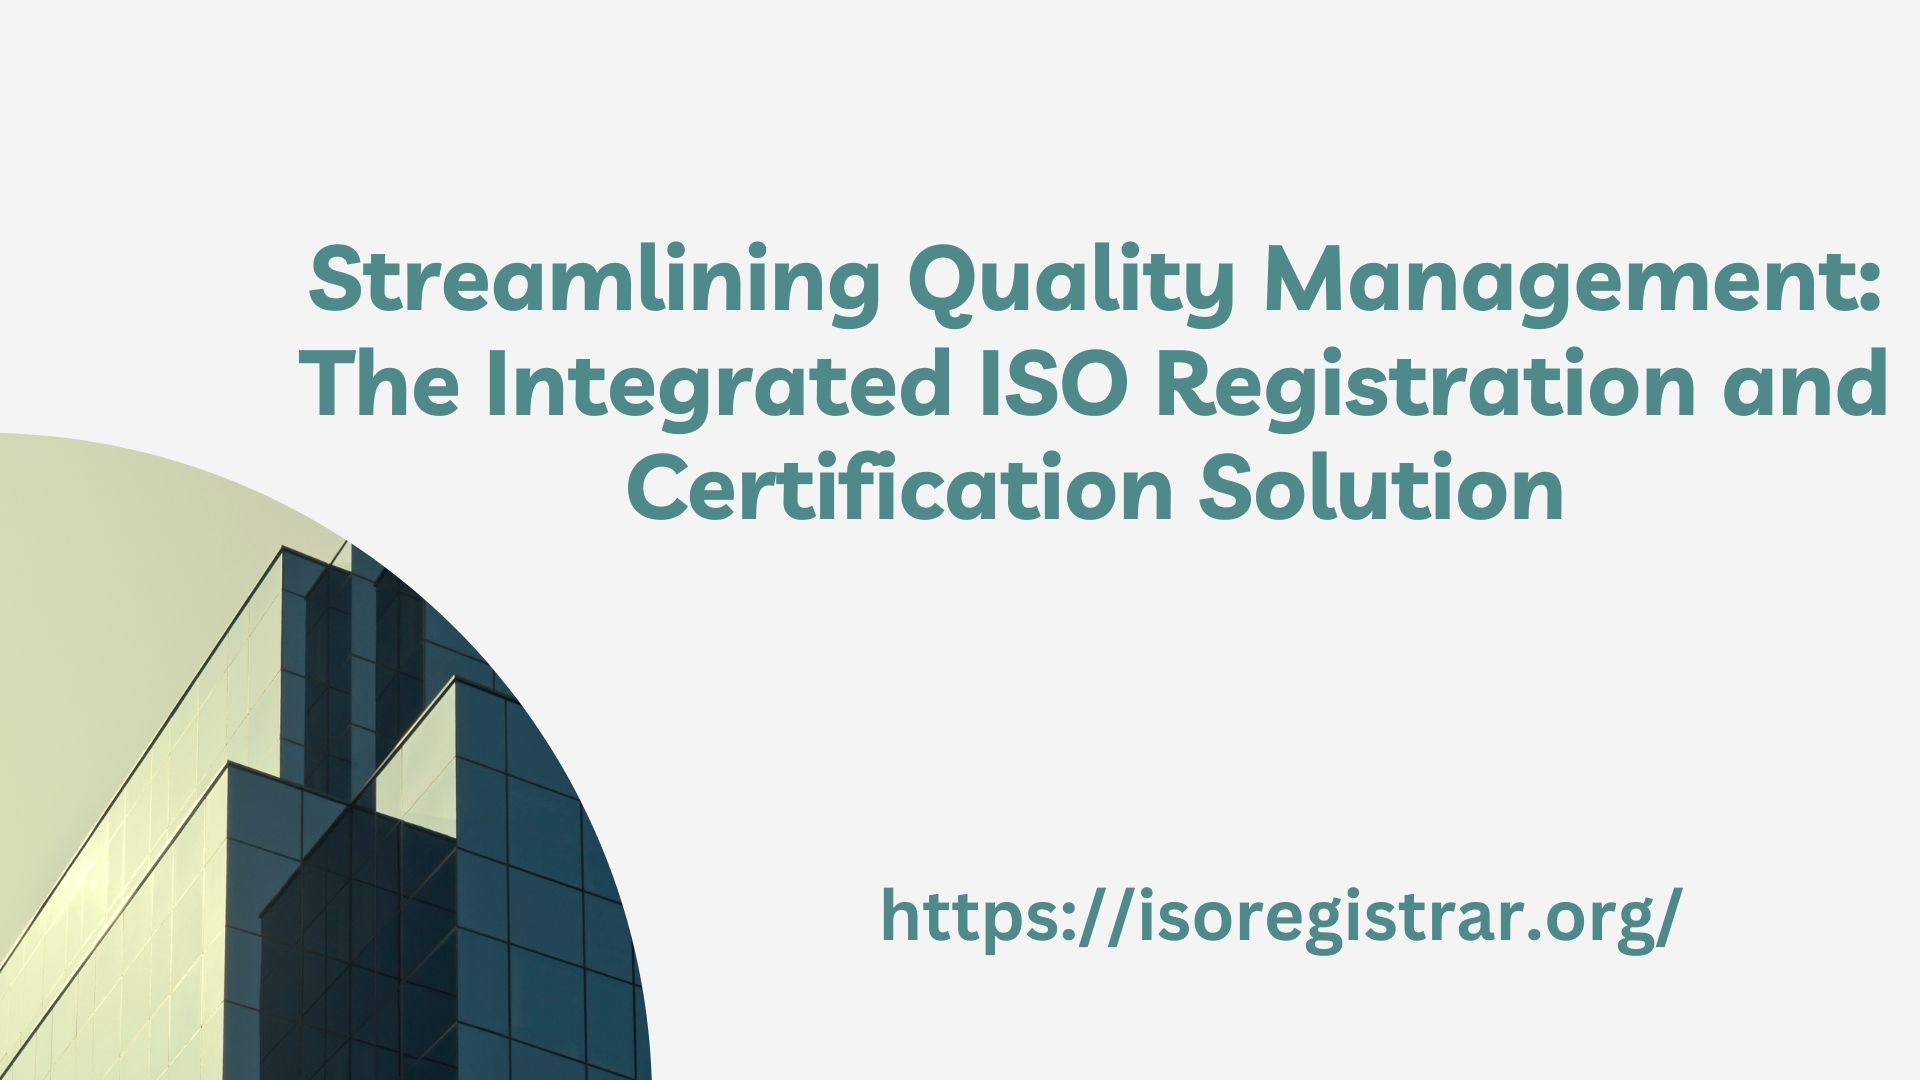 Streamlining Quality Management: The Integrated ISO Registration and Certification Solution